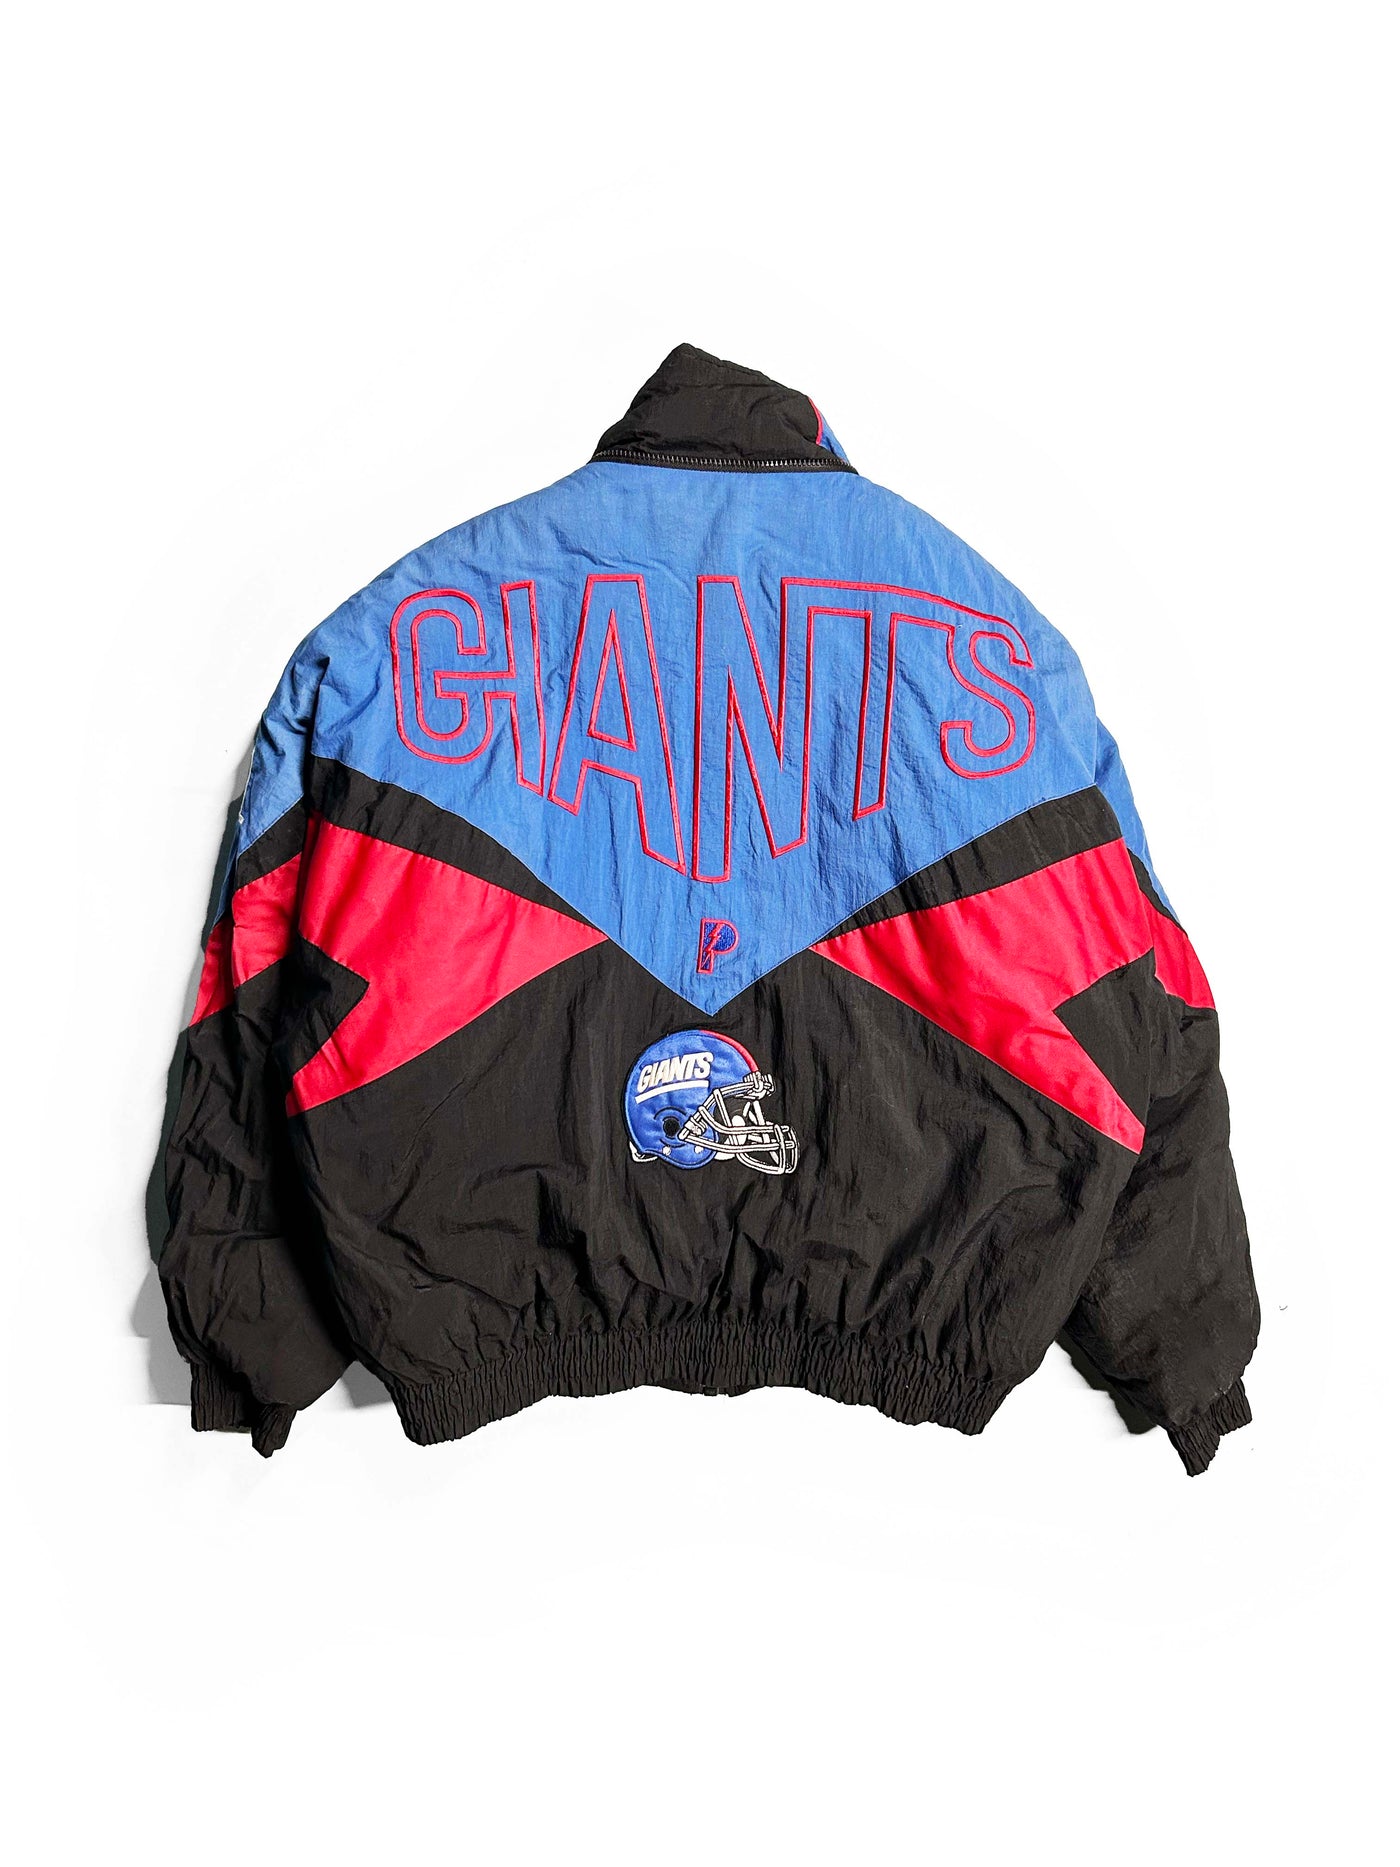 Vintage 90s New York Giants Pro Player Puffer Jacket